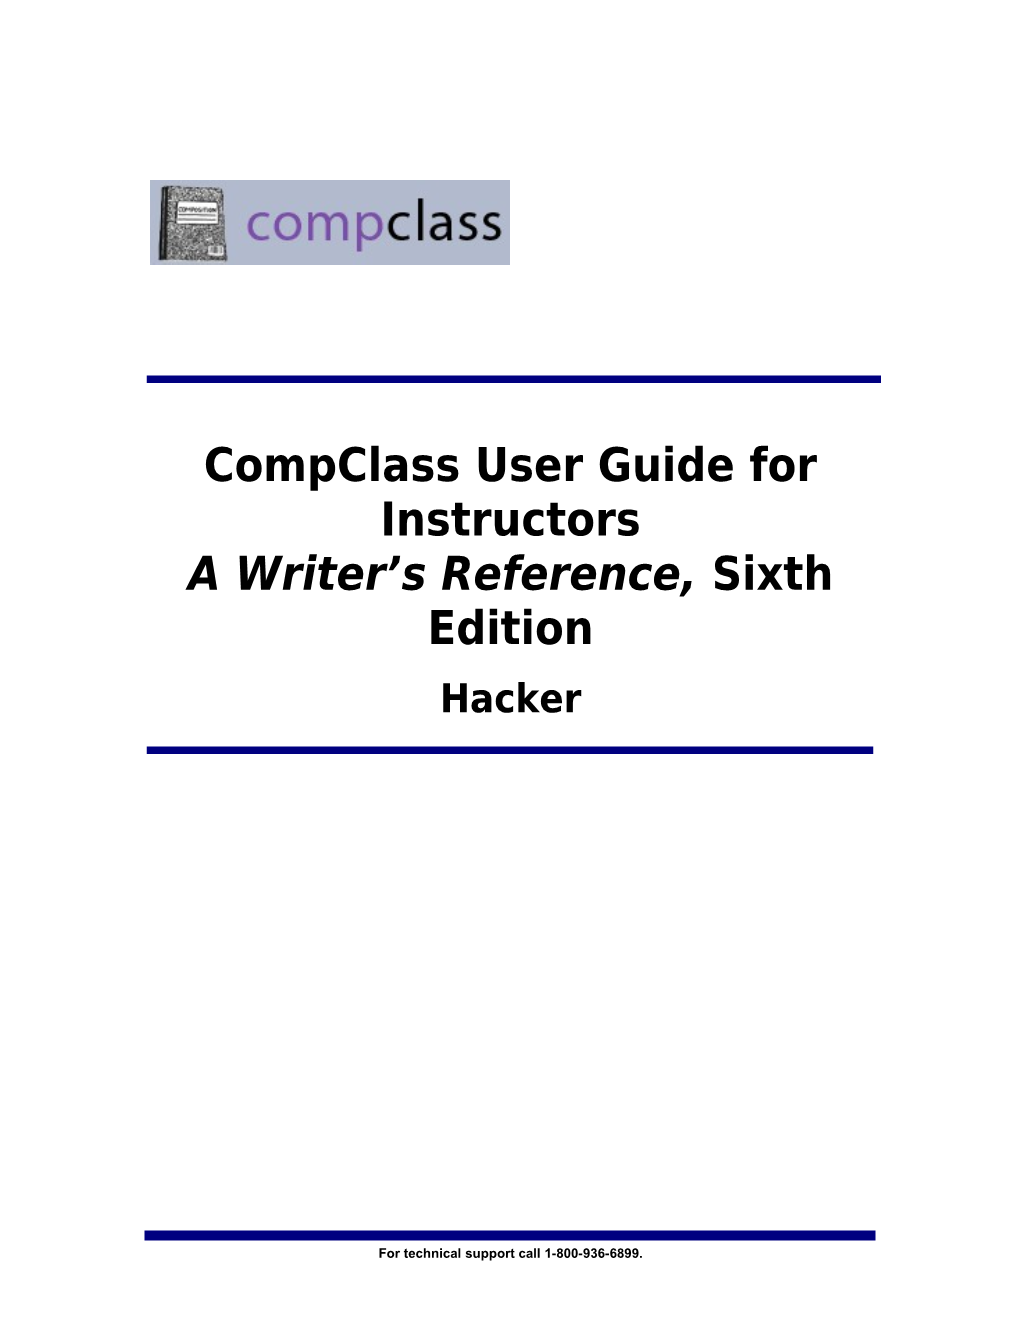 Compclass User Guide for Instructors a Writer S Reference, Sixth Edition